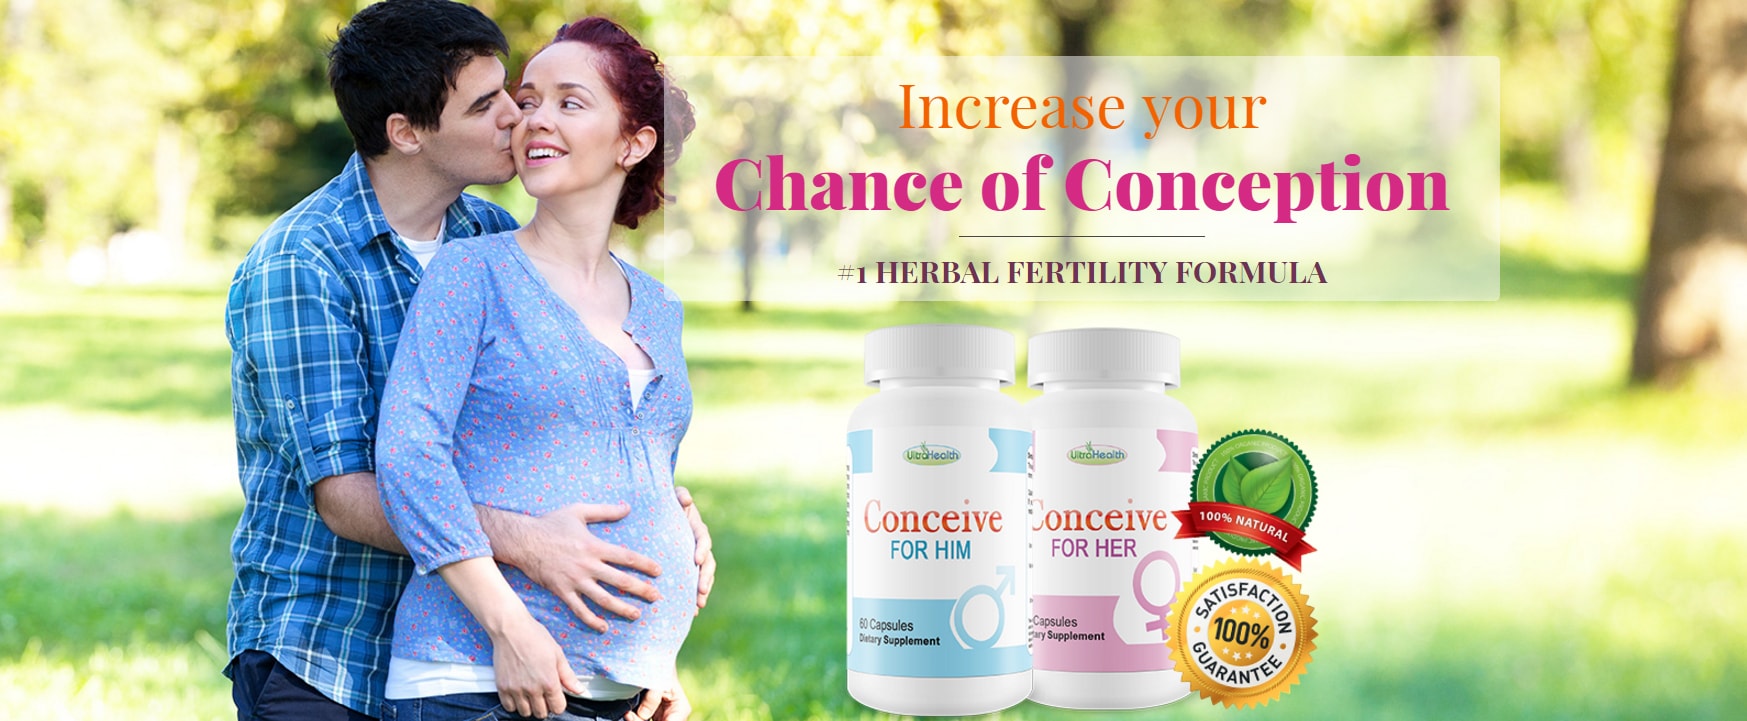 Conceive Easy Fertility Pills In Canada